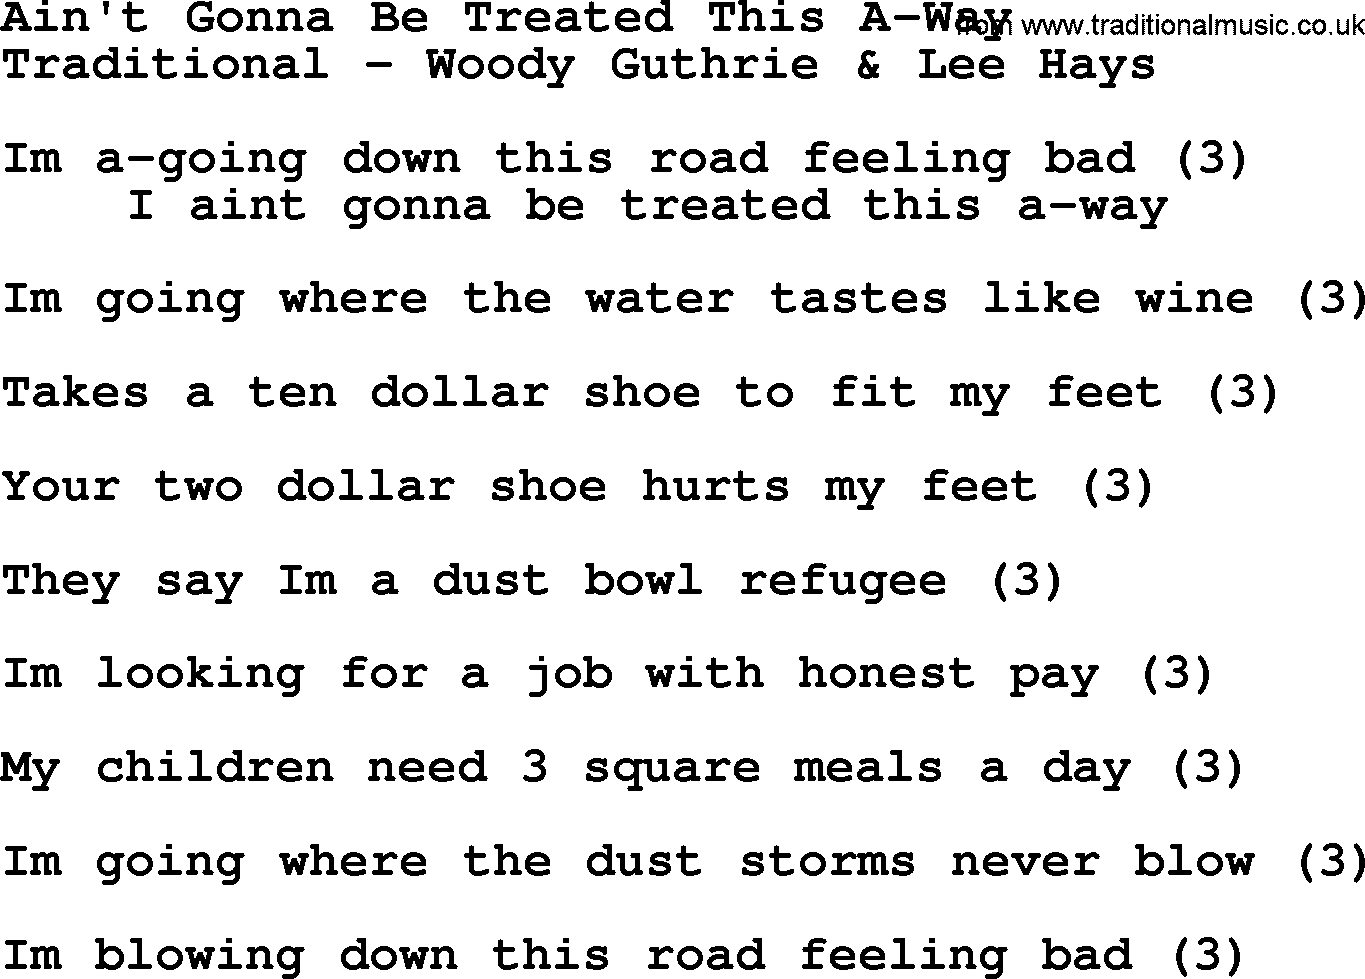 Woody Guthrie song Ain't Gonna Be Treated This A-way lyrics and chords